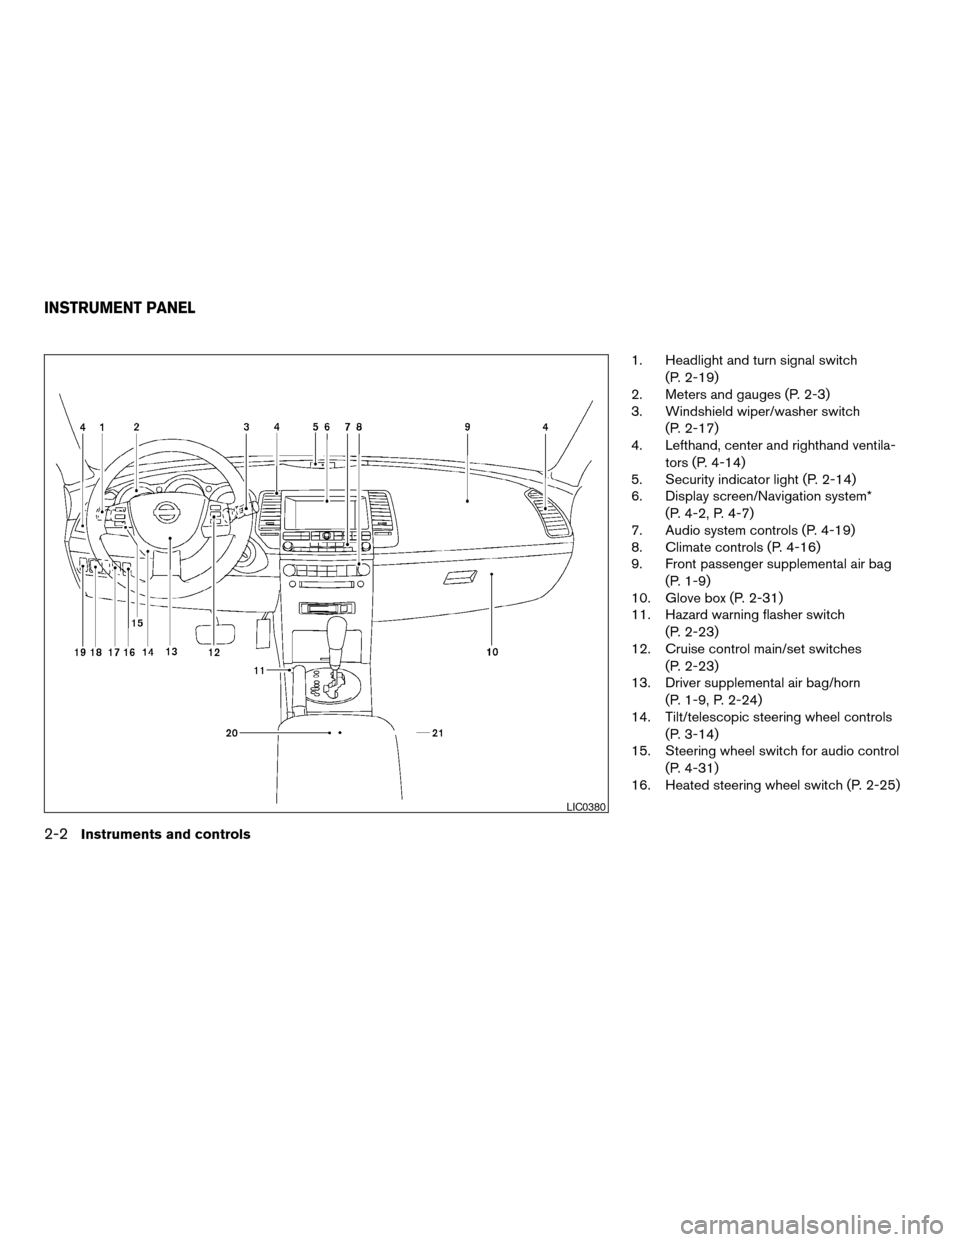 NISSAN MAXIMA 2004 A34 / 6.G Owners Manual 1. Headlight and turn signal switch
(P. 2-19)
2. Meters and gauges (P. 2-3)
3. Windshield wiper/washer switch
(P. 2-17)
4. Lefthand, center and righthand ventila-
tors (P. 4-14)
5. Security indicator 